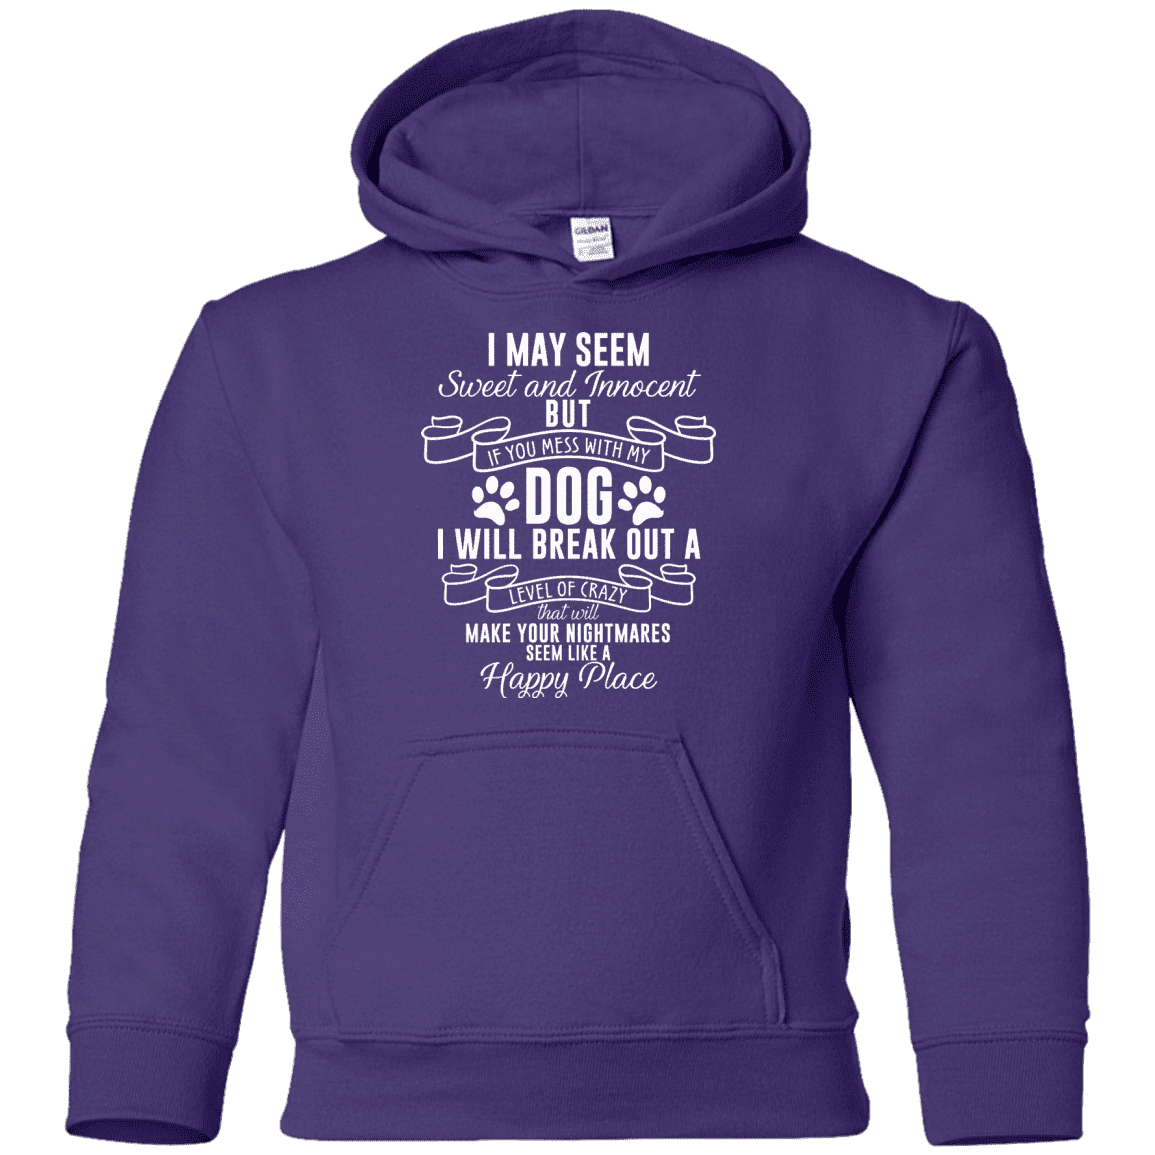 I May Seem Sweet And Innocent - Youth Hoodie.